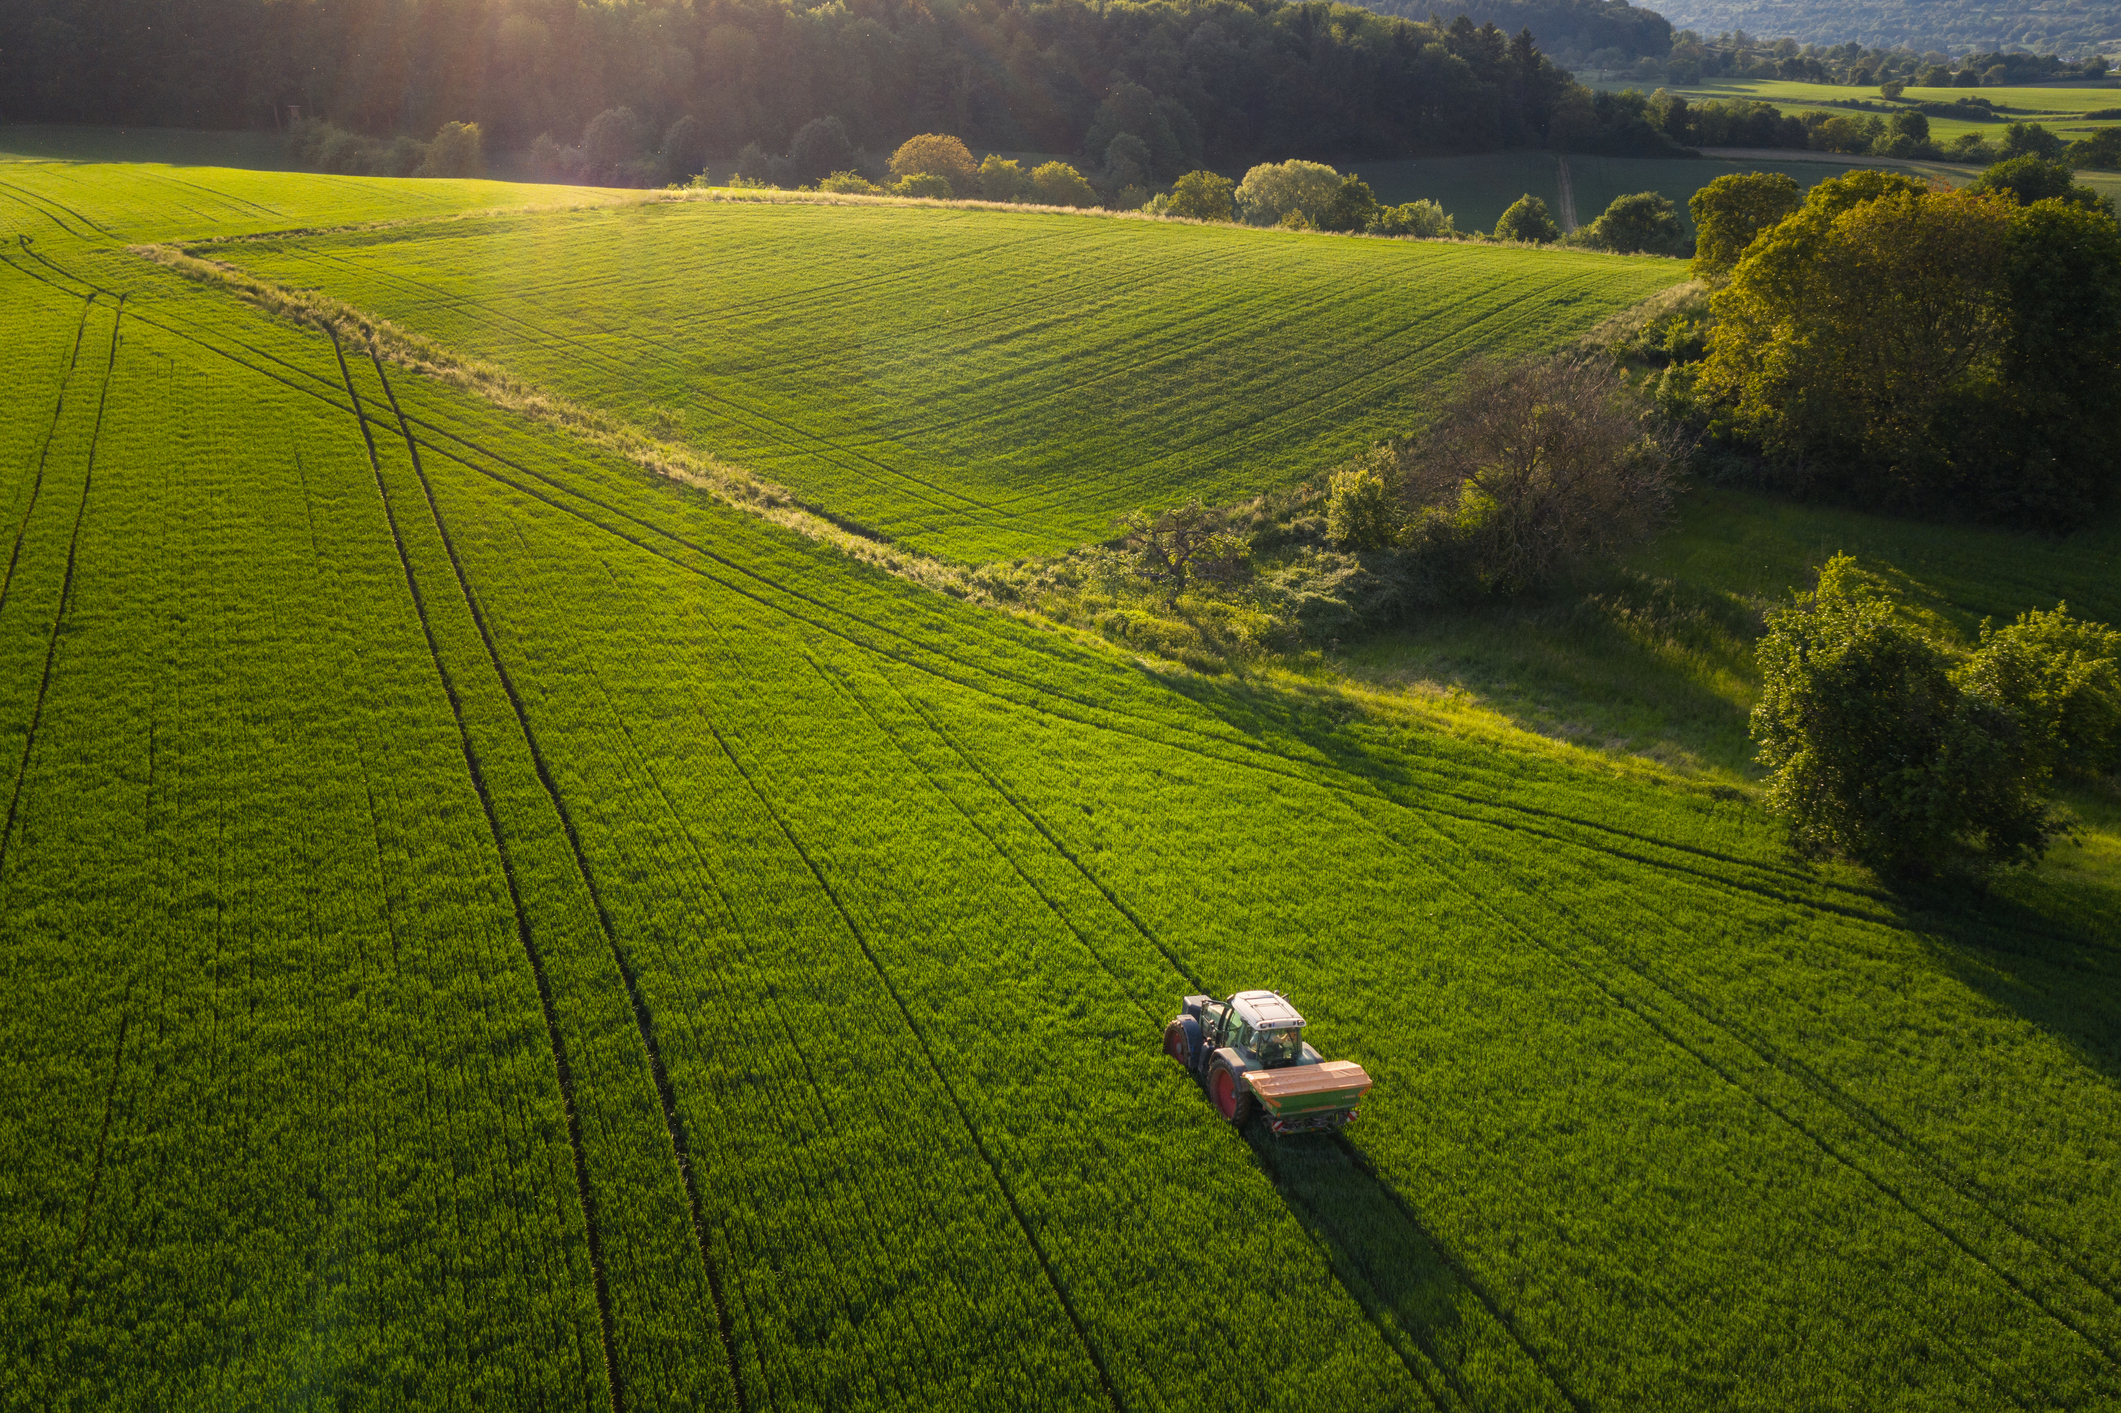 Aerial view on agricultural landscape in spring. A farmer with his machine is driving on a wheat field. Captured with a drone in southern Germany.